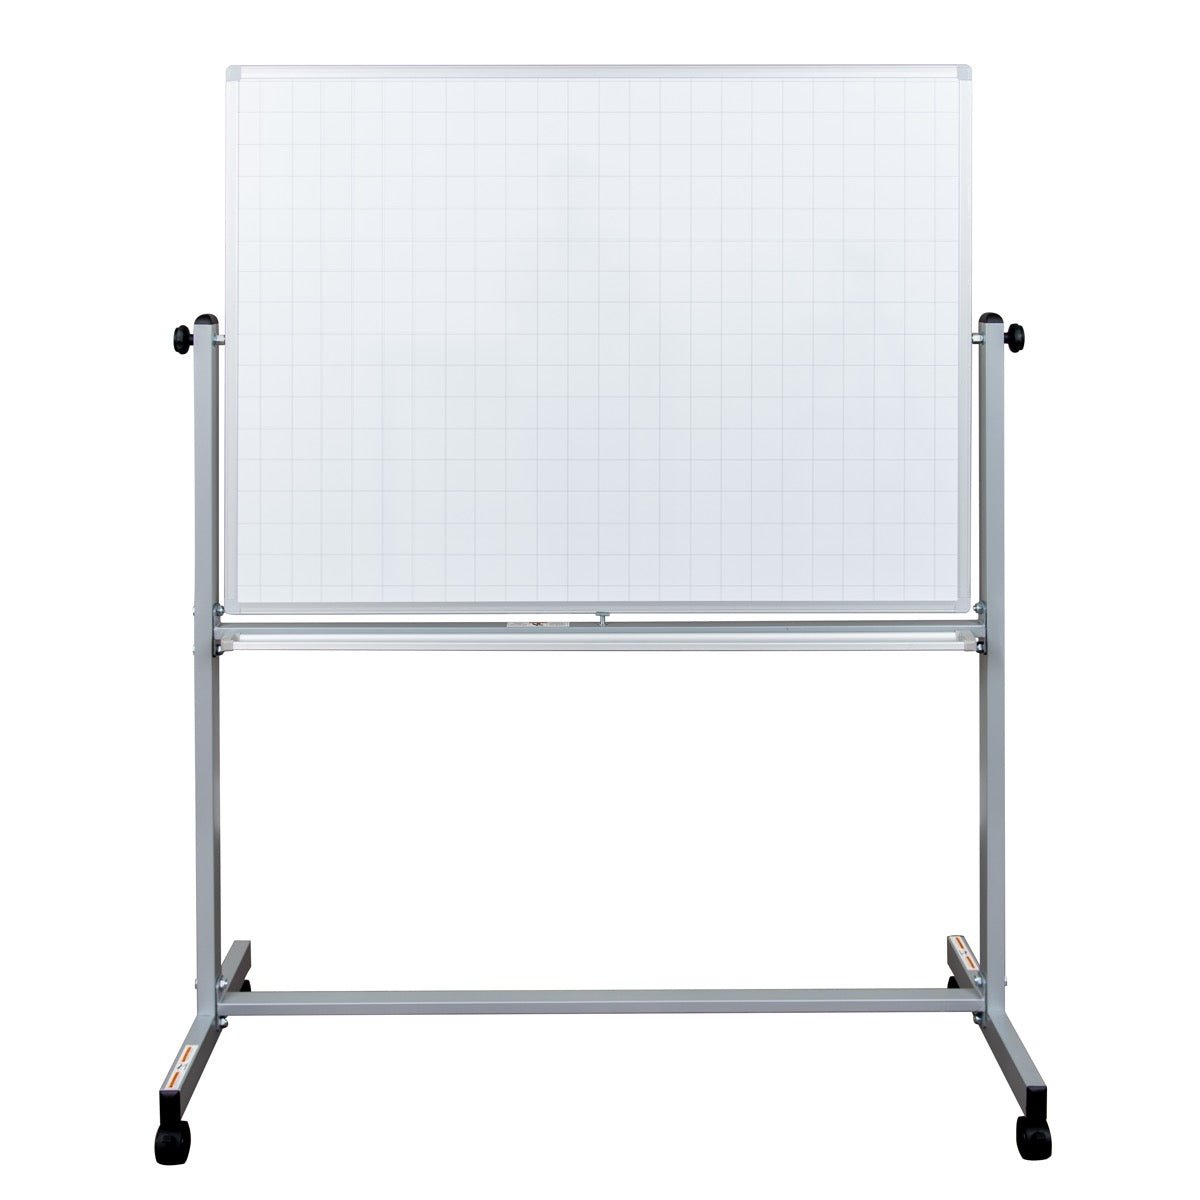 48"W x 36"H Mobile Whiteboard - Ghost Grid/Whiteboard Double-sided Magnetic dry erase markerboard - Luxor MB4836LB - SchoolOutlet